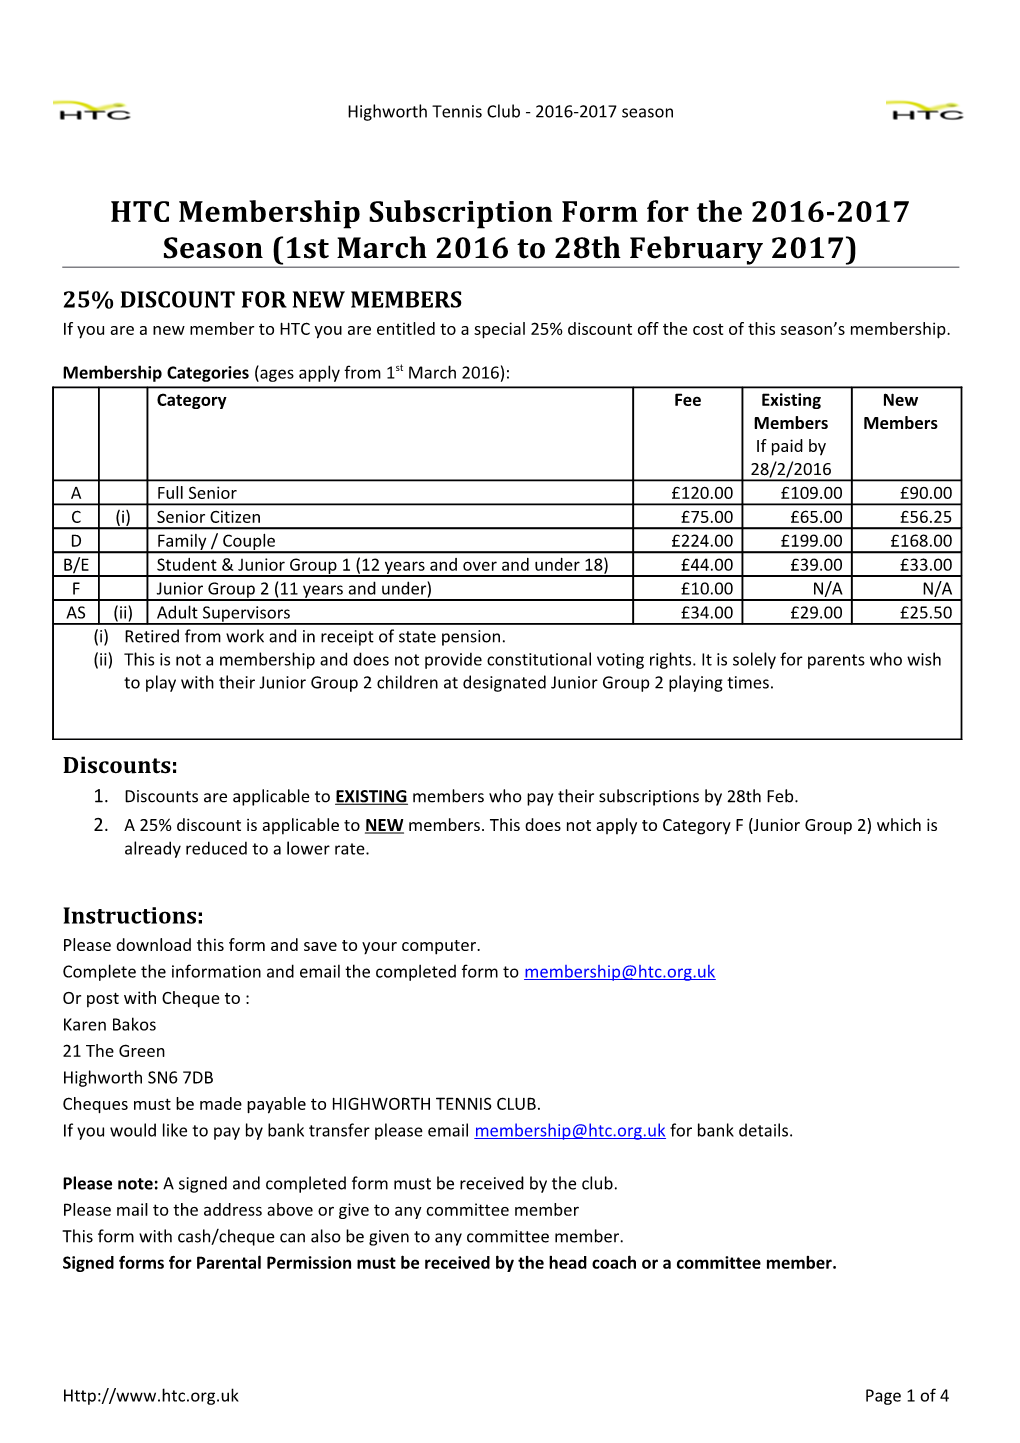 HTC Membership Subscription Form for the 2016-2017Season (1St March 2016 to 28Thfebruary 2017)